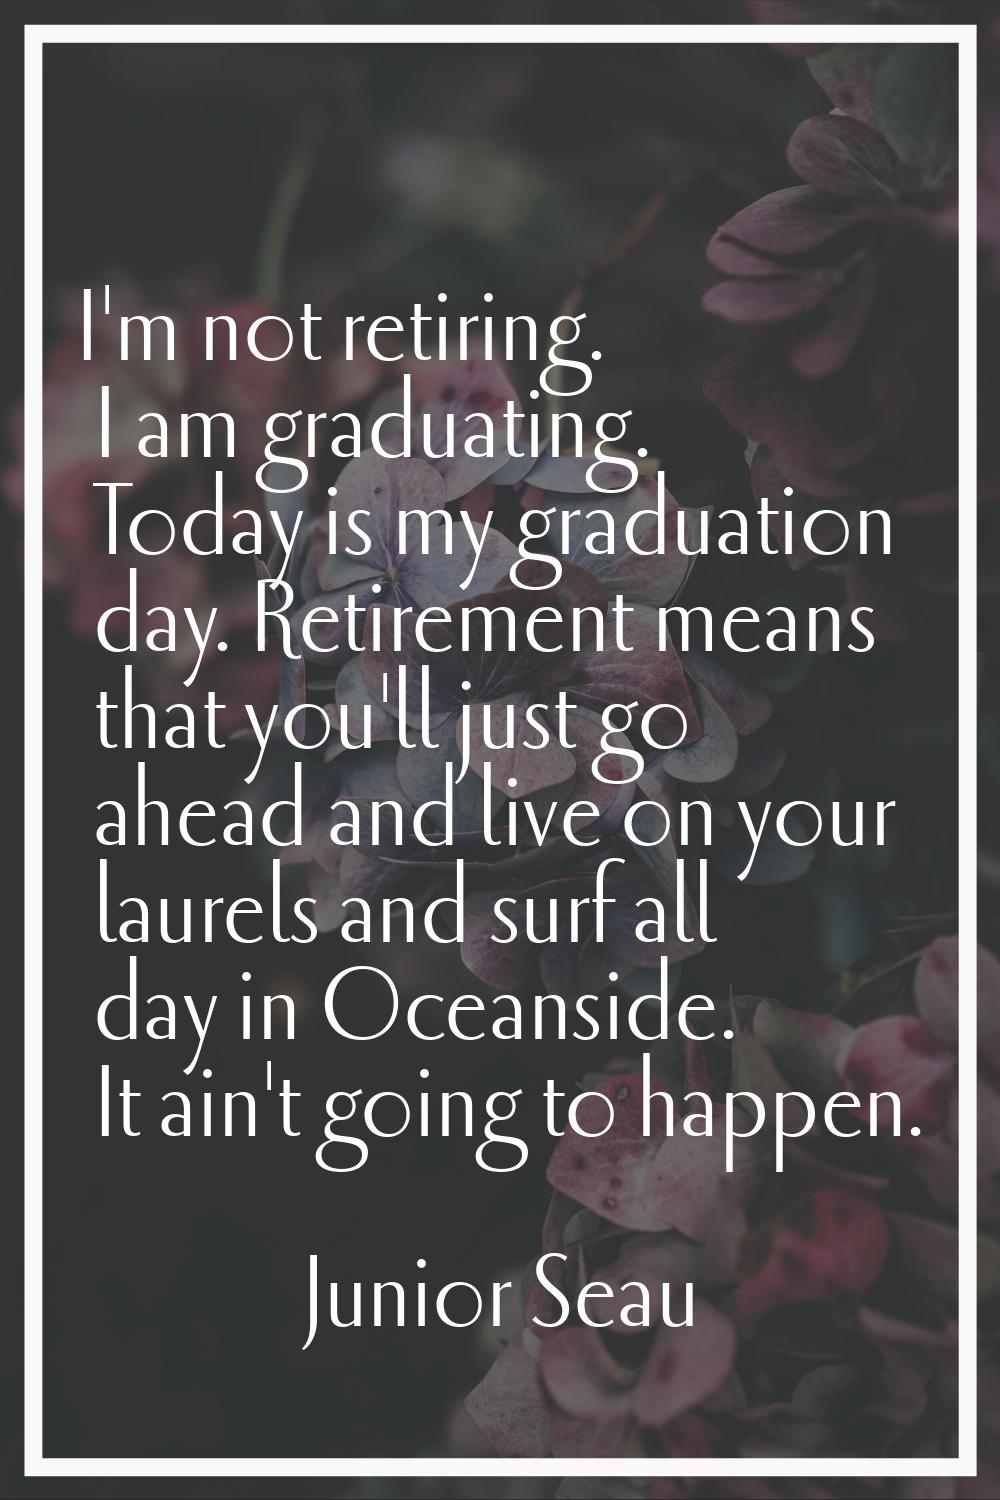 I'm not retiring. I am graduating. Today is my graduation day. Retirement means that you'll just go